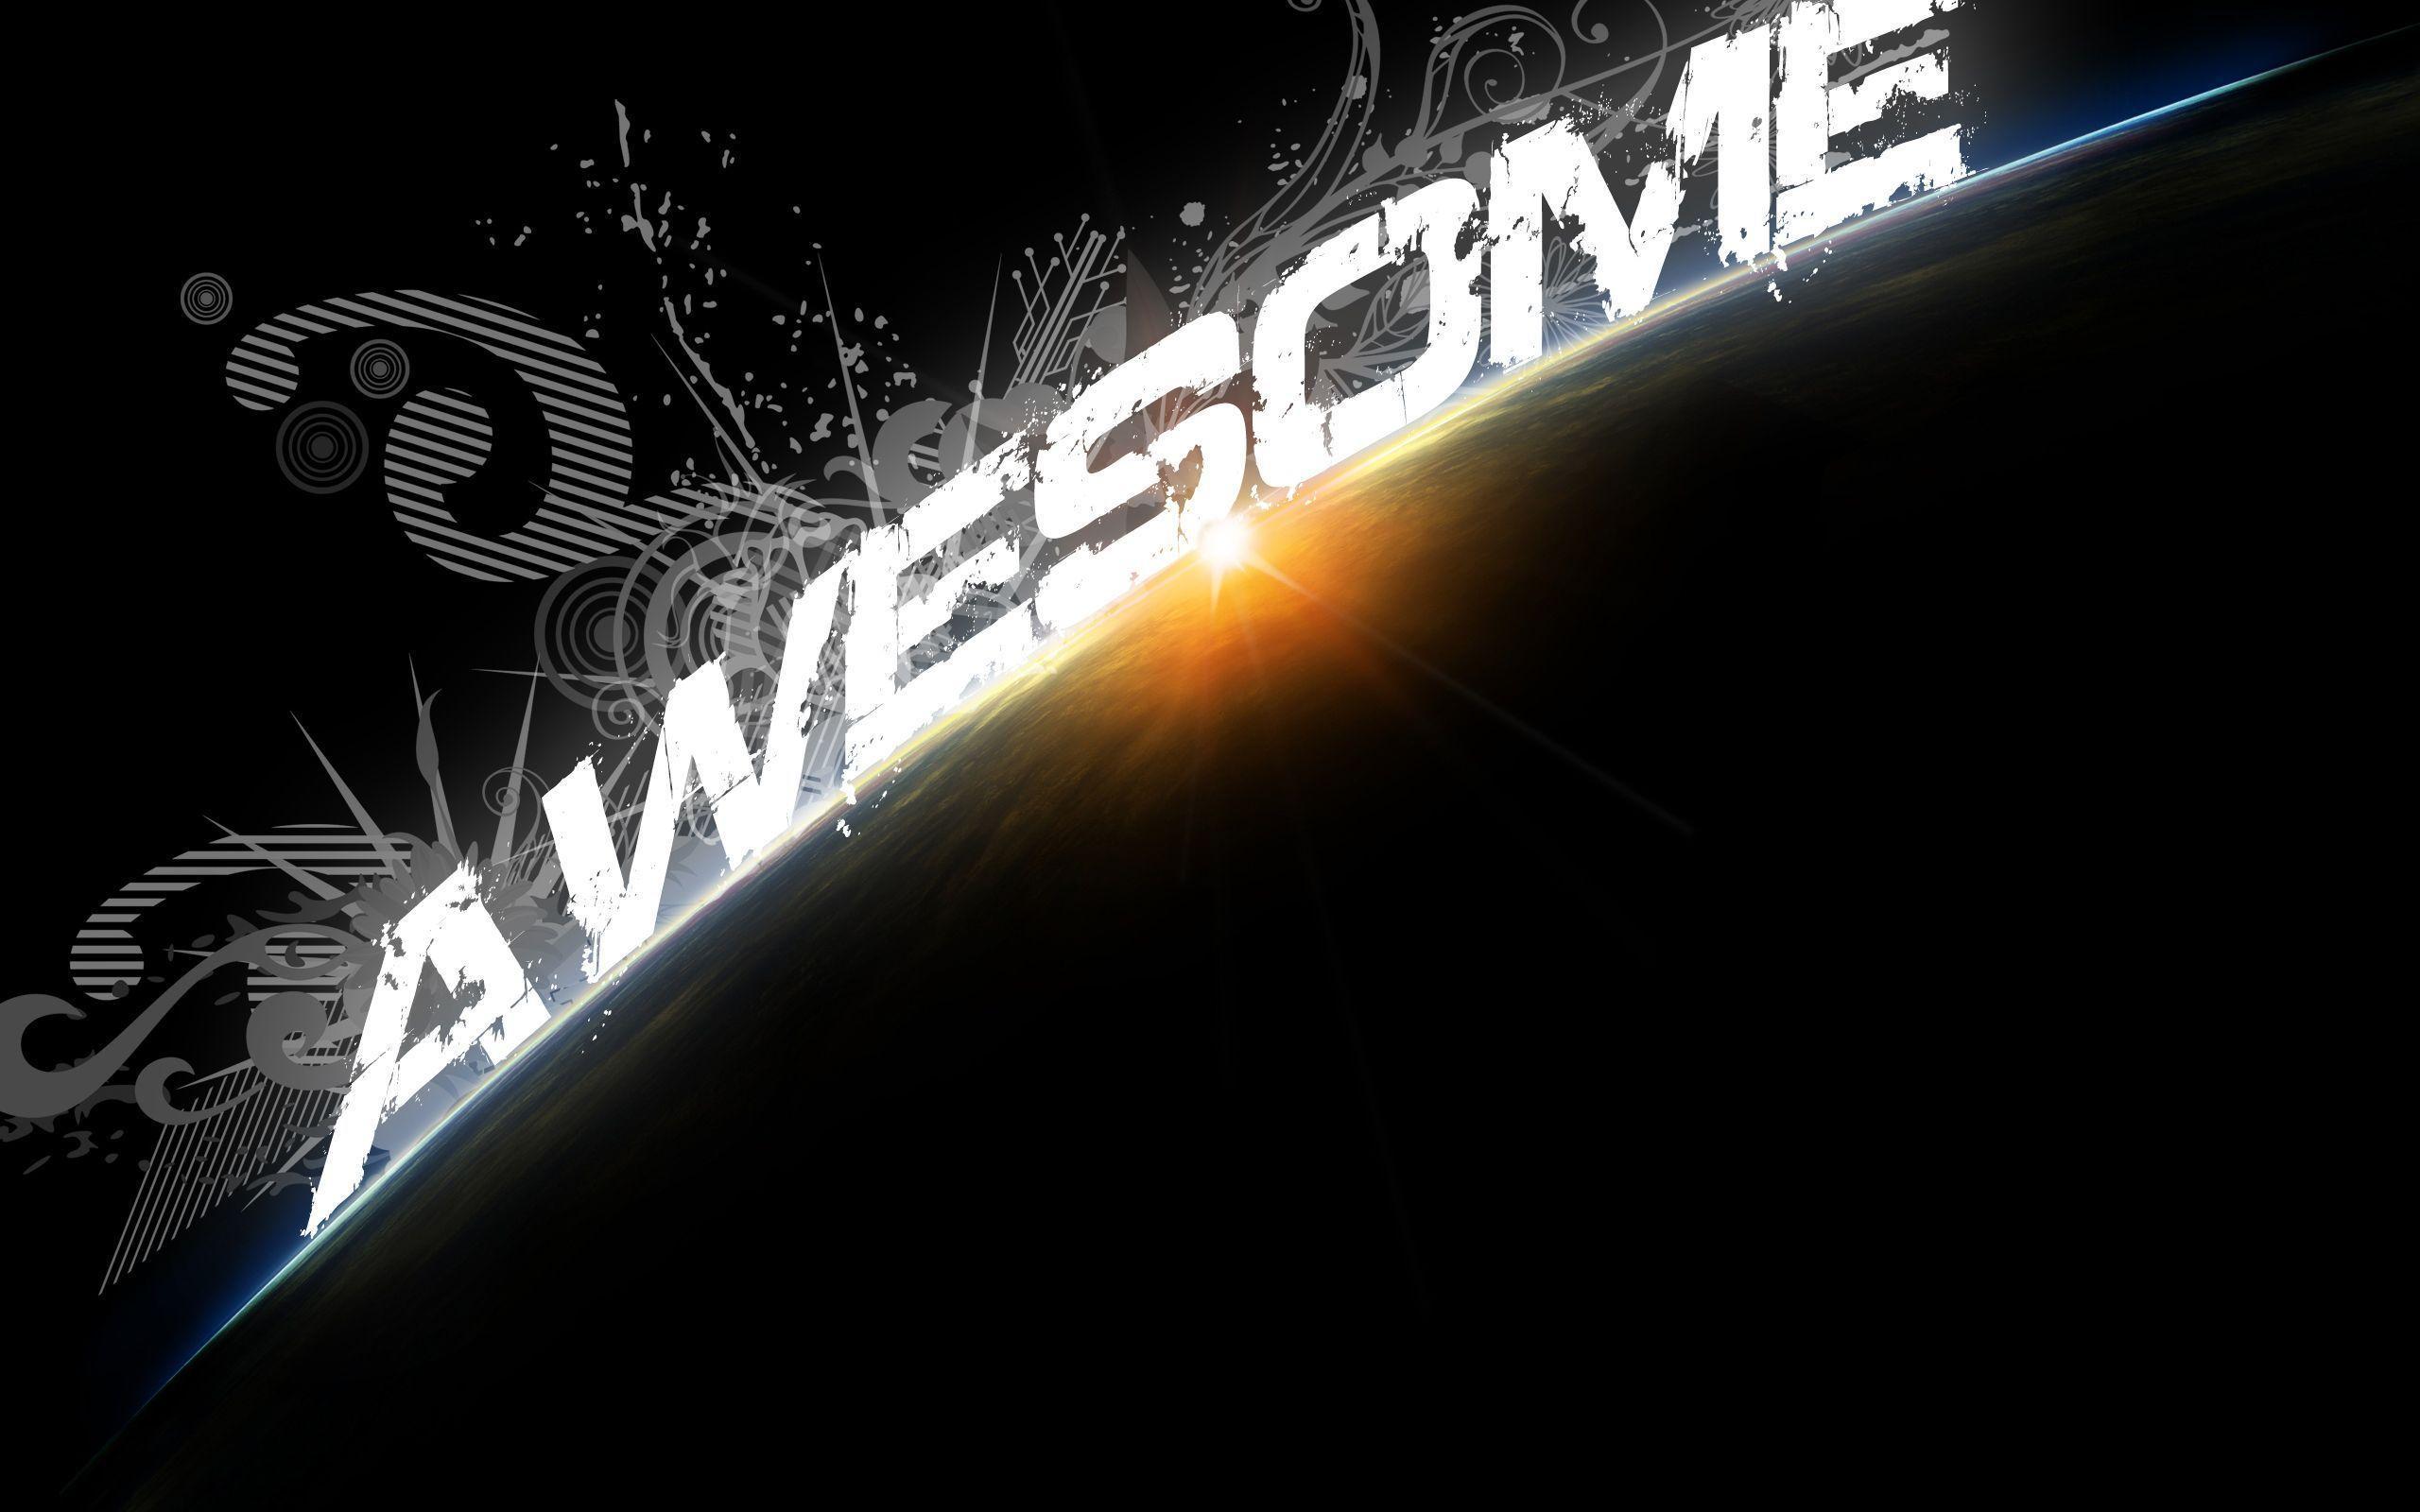 Awesome Wallpaper 11 cool picture 29050 HD Wallpaper. Wallroro